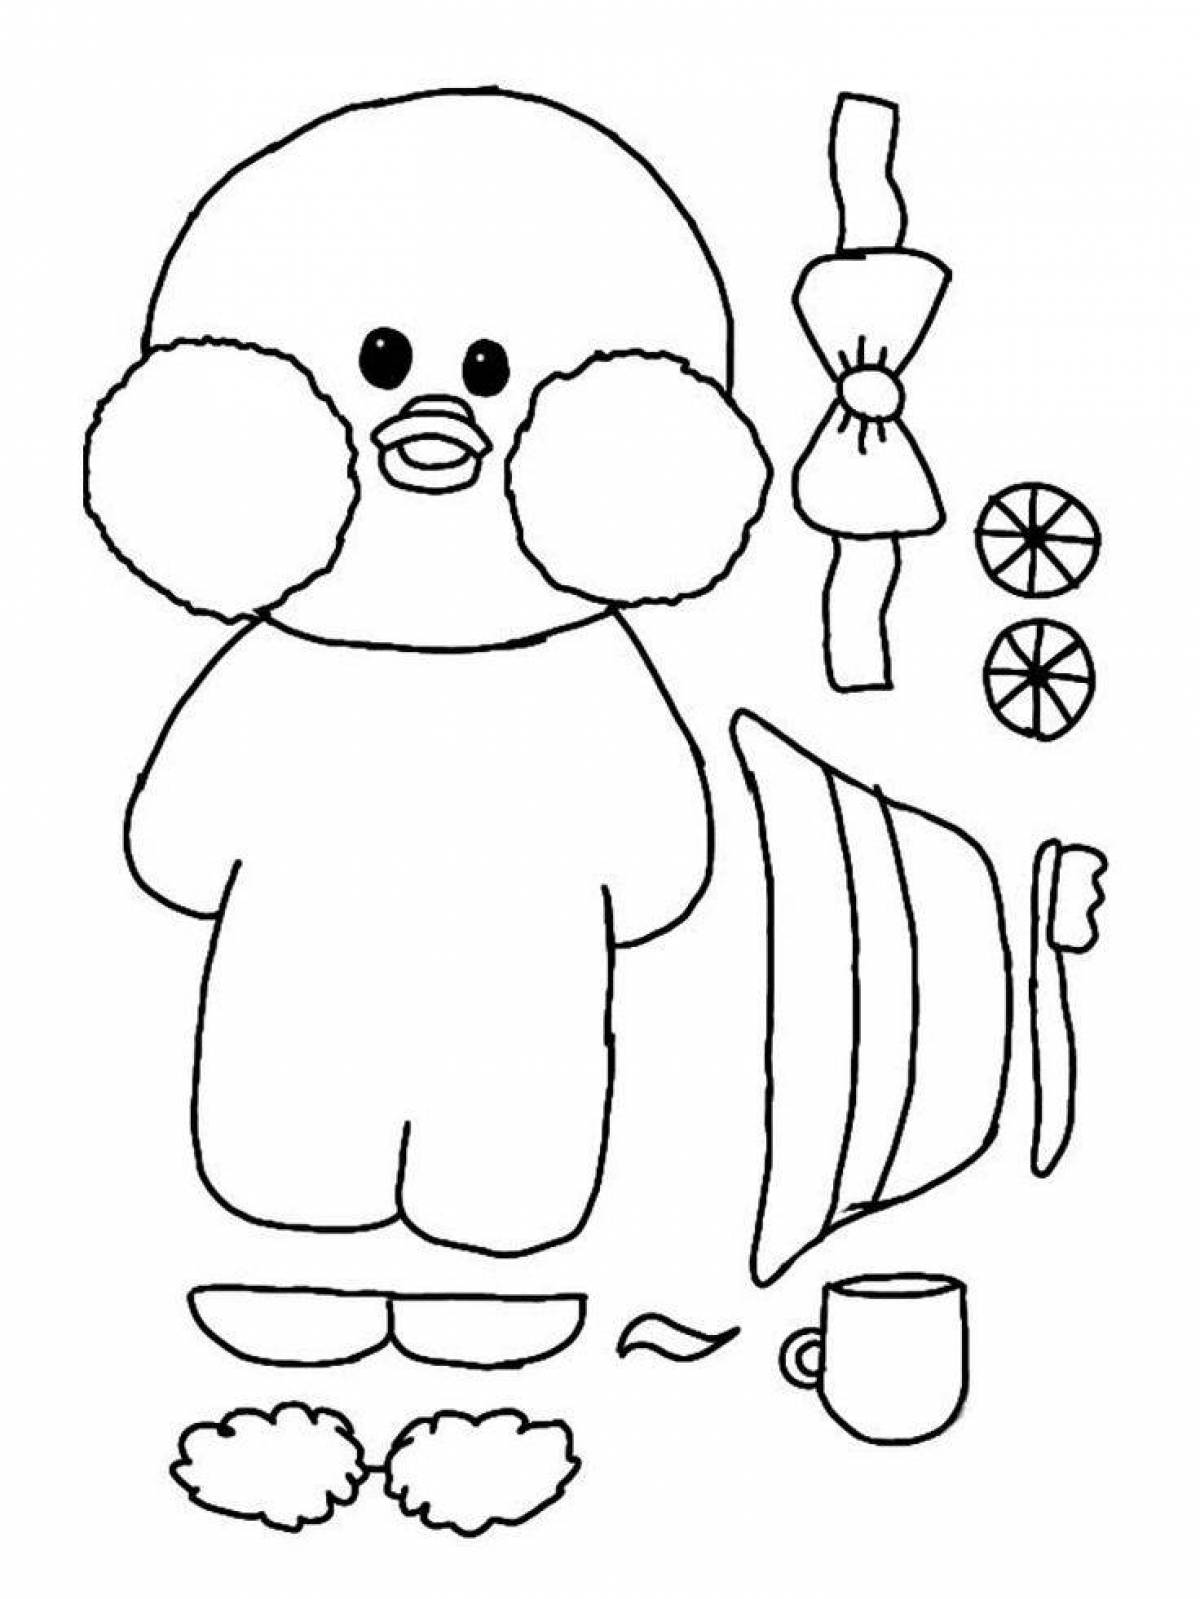 Lalafanfan bright duck coloring page